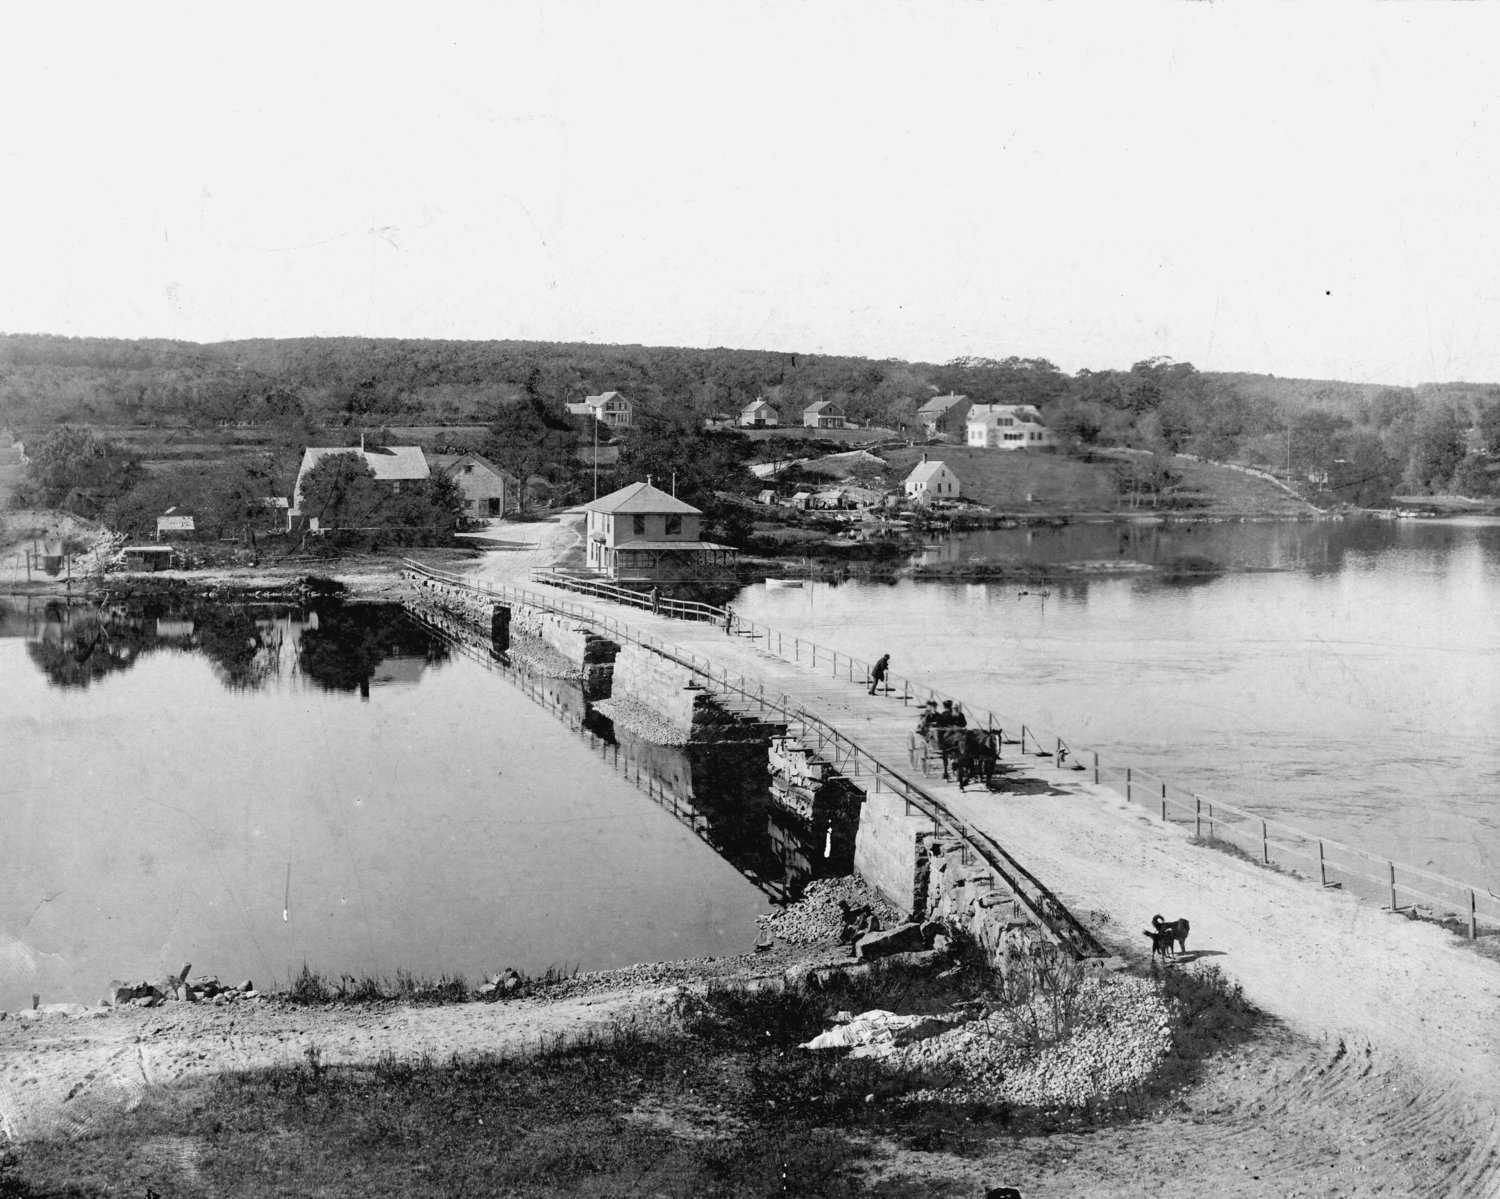 A horse-drawn buggy sets out across an earlier version of Hix Bridge more than a century ago. When the bridge was rebuilt after later hurricanes and on other occasions, rubble from the pilings was dumped alongside.